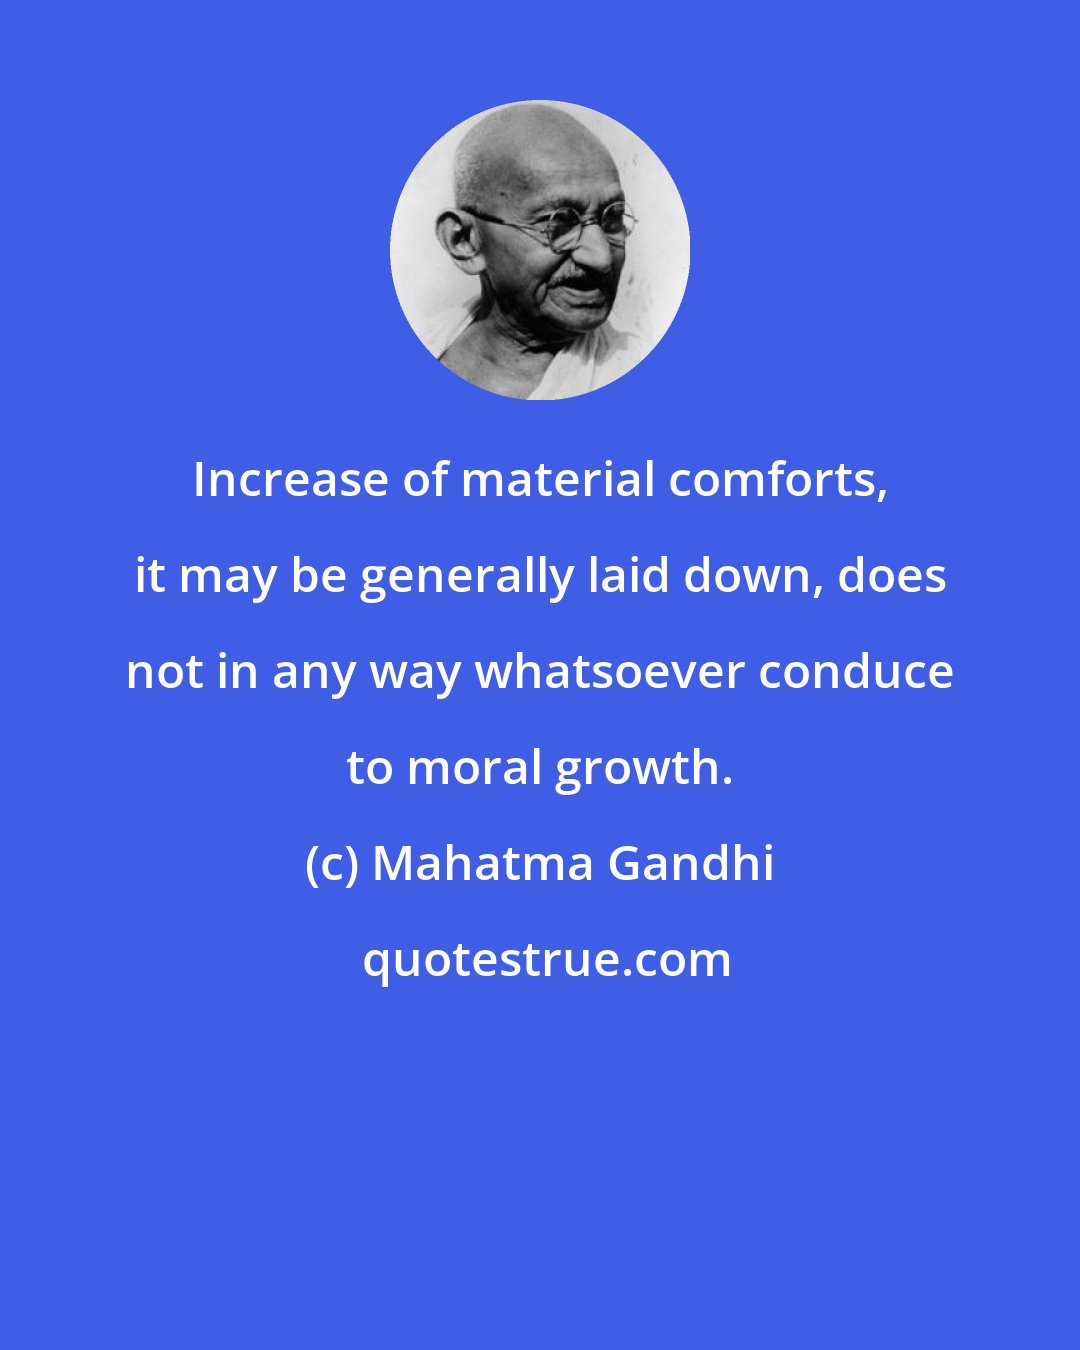 Mahatma Gandhi: Increase of material comforts, it may be generally laid down, does not in any way whatsoever conduce to moral growth.